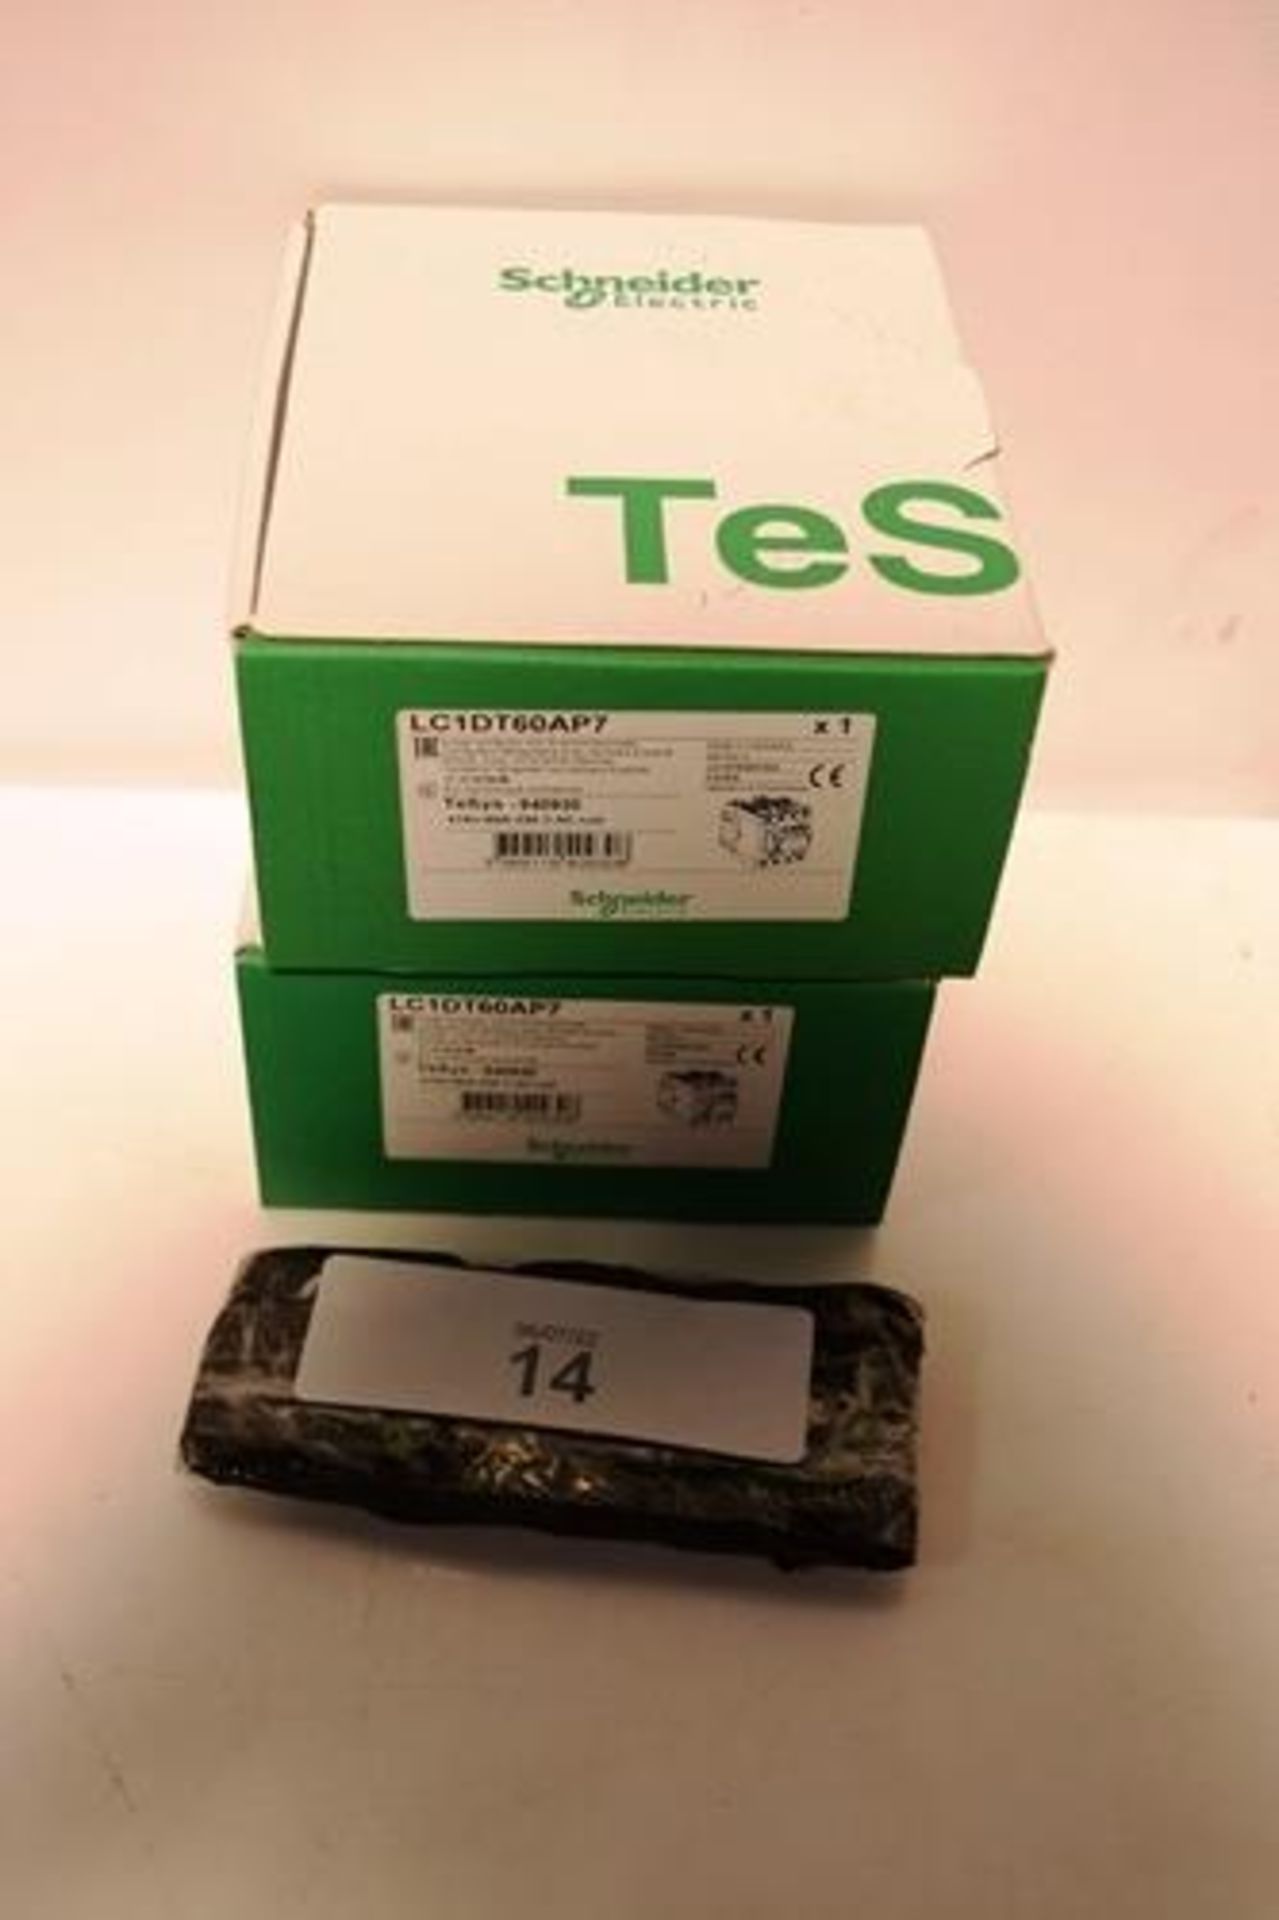 2 x Schneider 4 pole contactor with Everlink terminals, model LC1DT60AP7 - New in box (SW8)